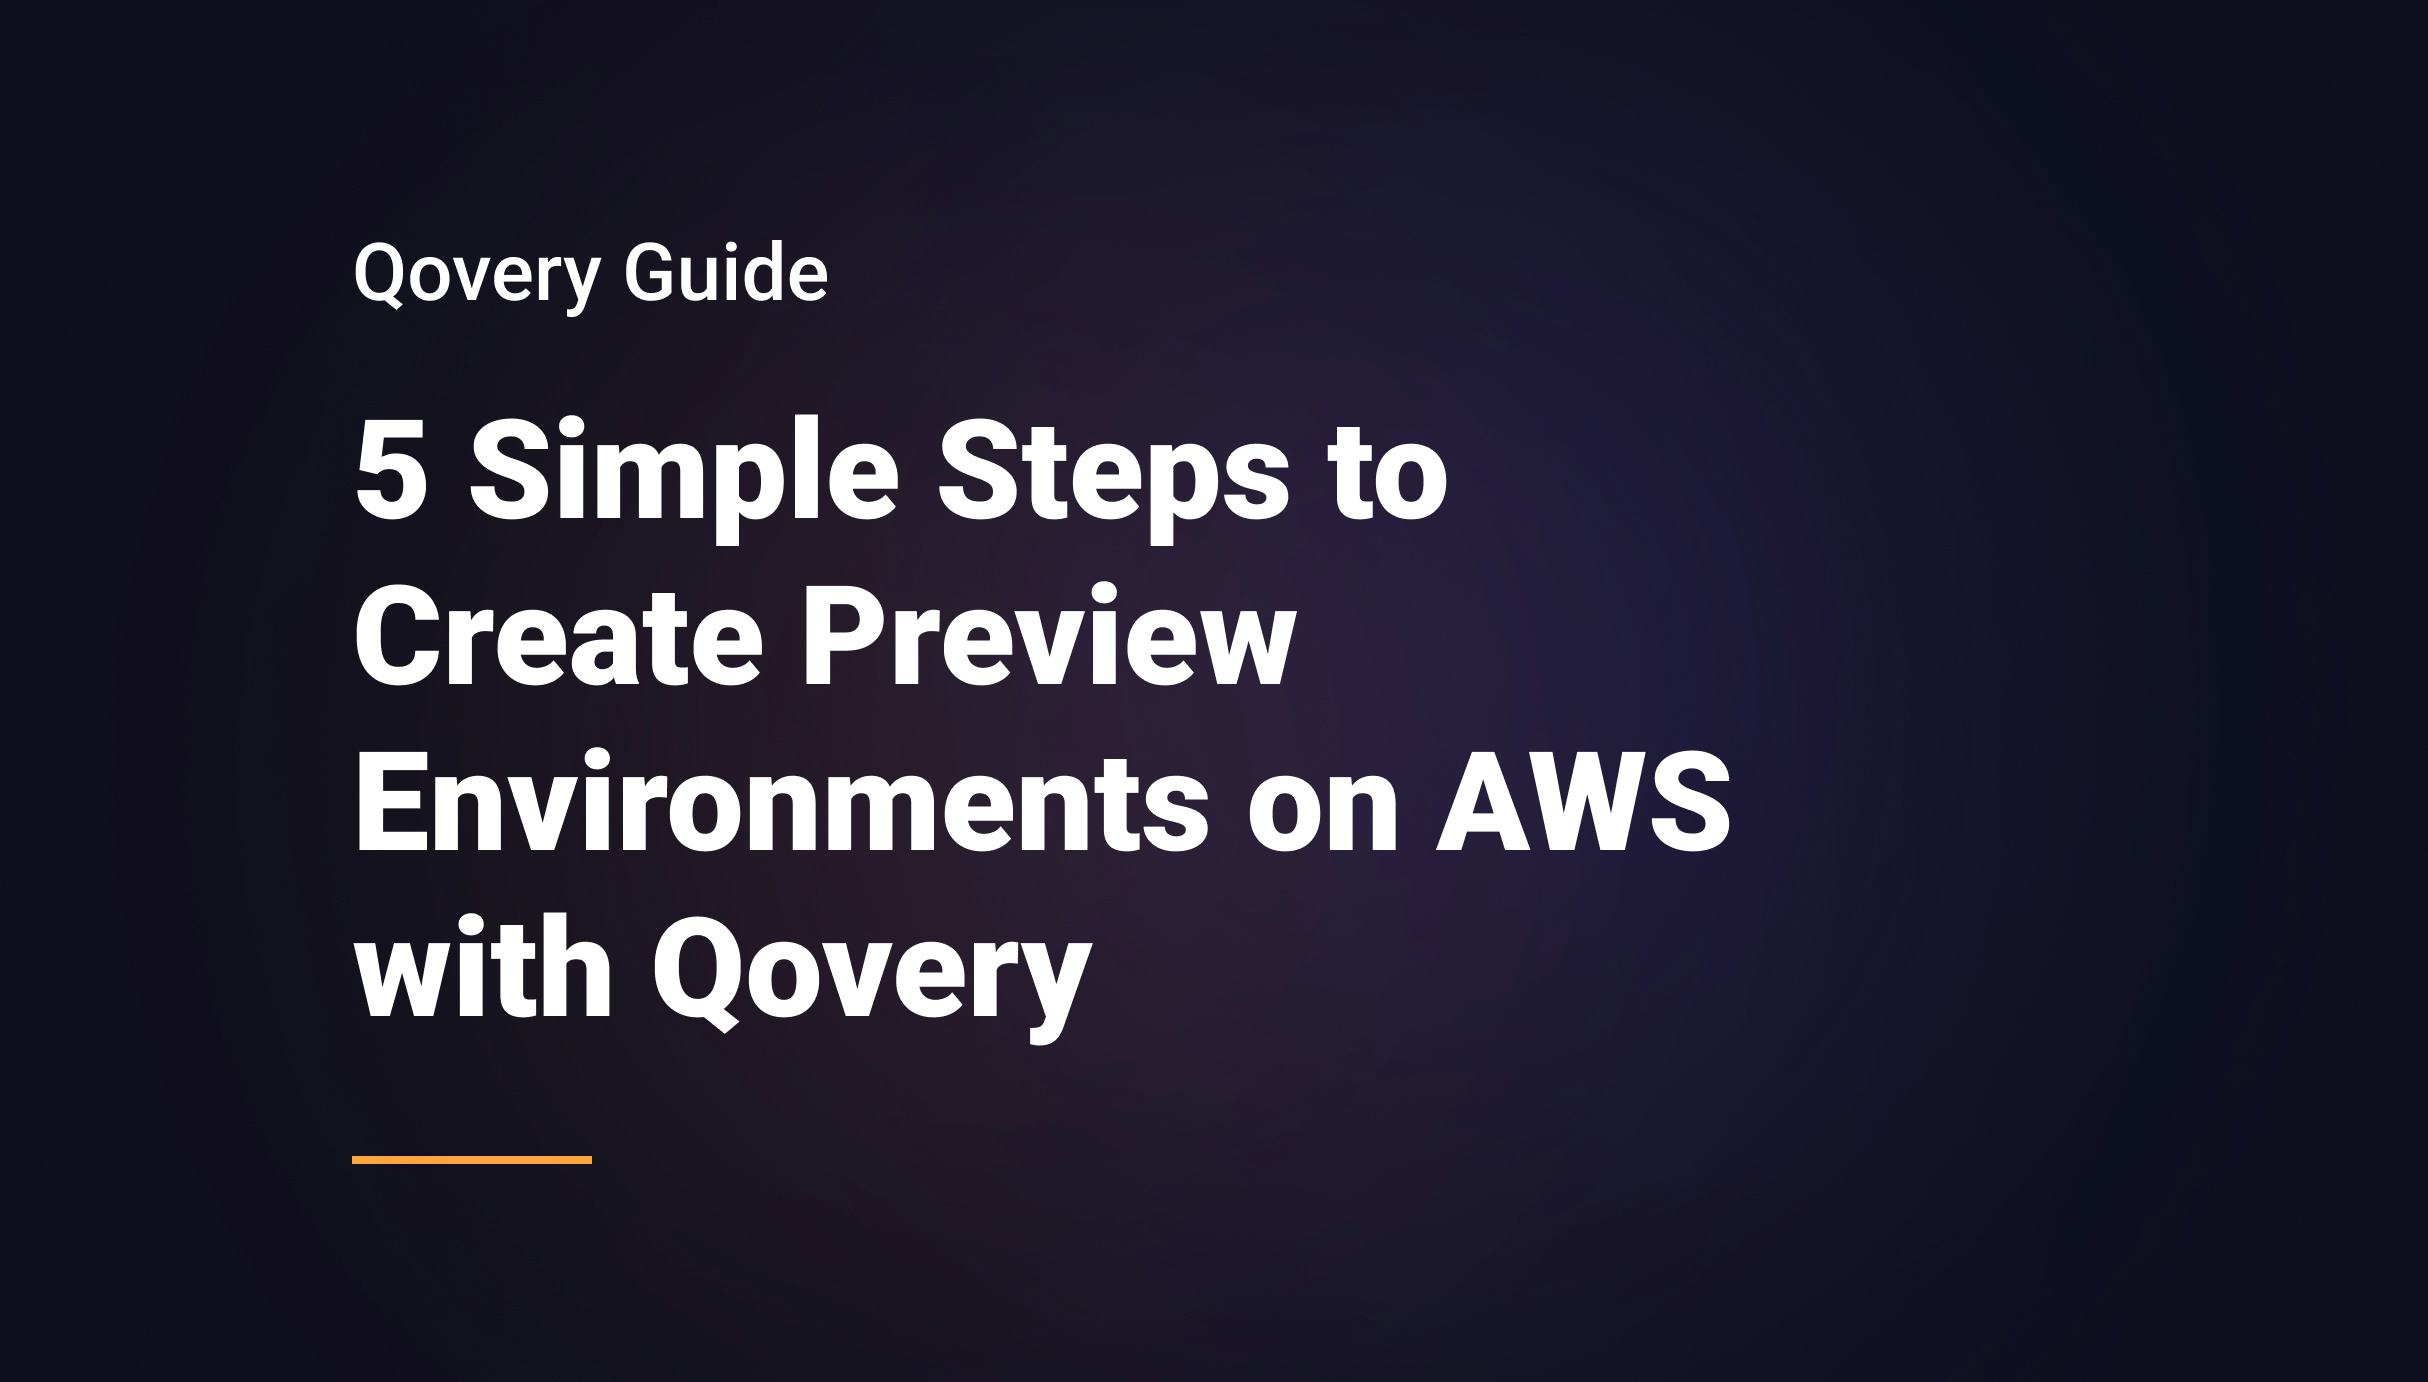 5 Simple Steps to Create Preview Environments on AWS with Qovery - Qovery